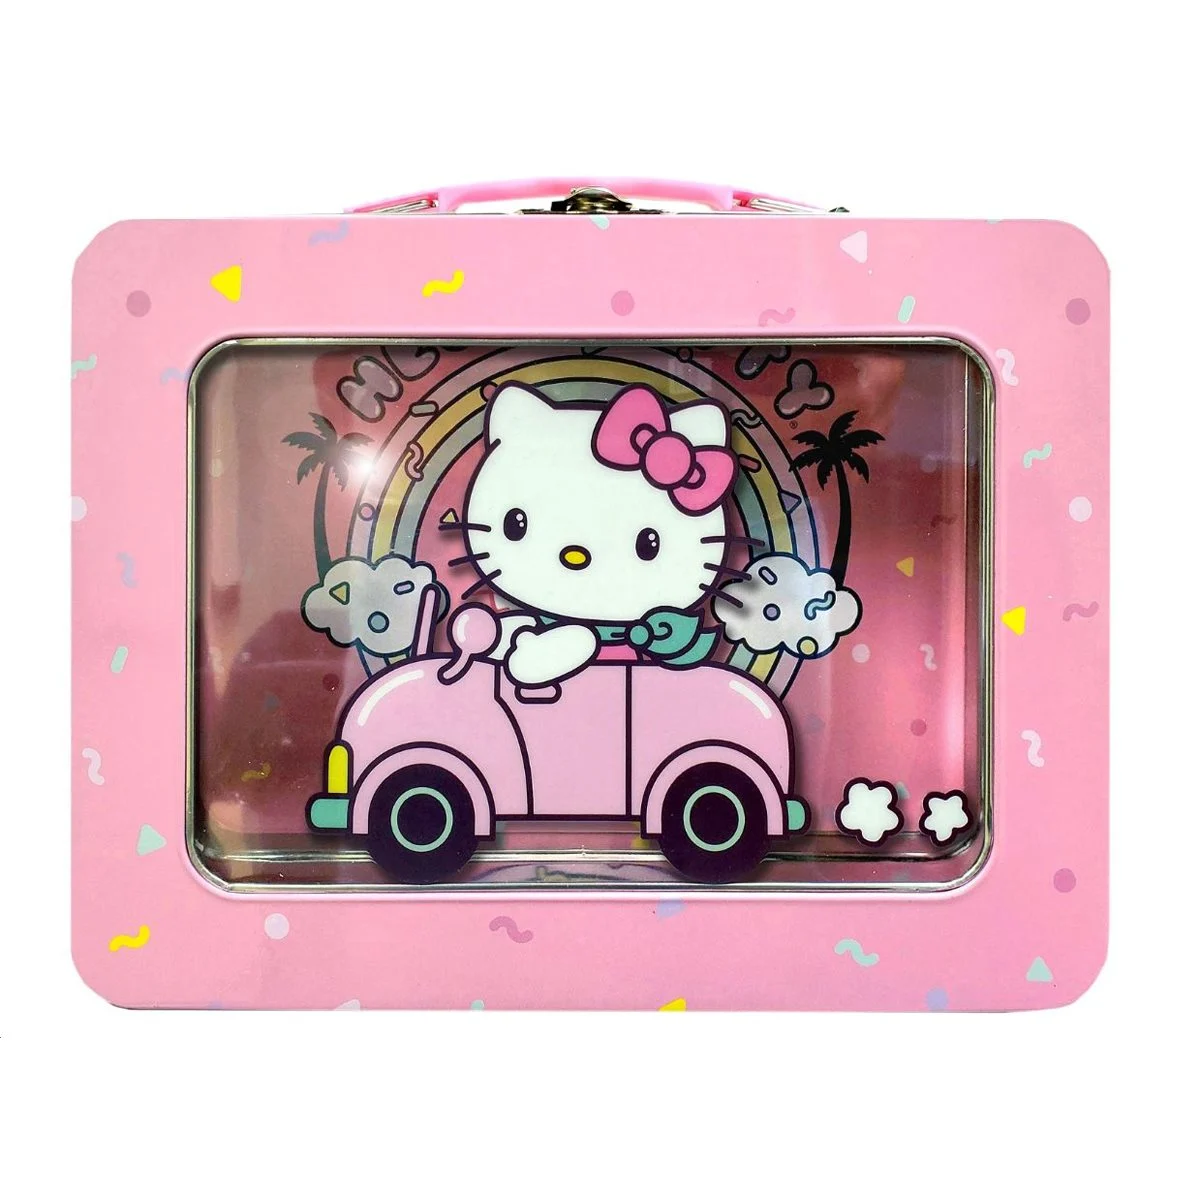 HELLO KITTY XL TIN LUNCH BOX WITH WINDOW